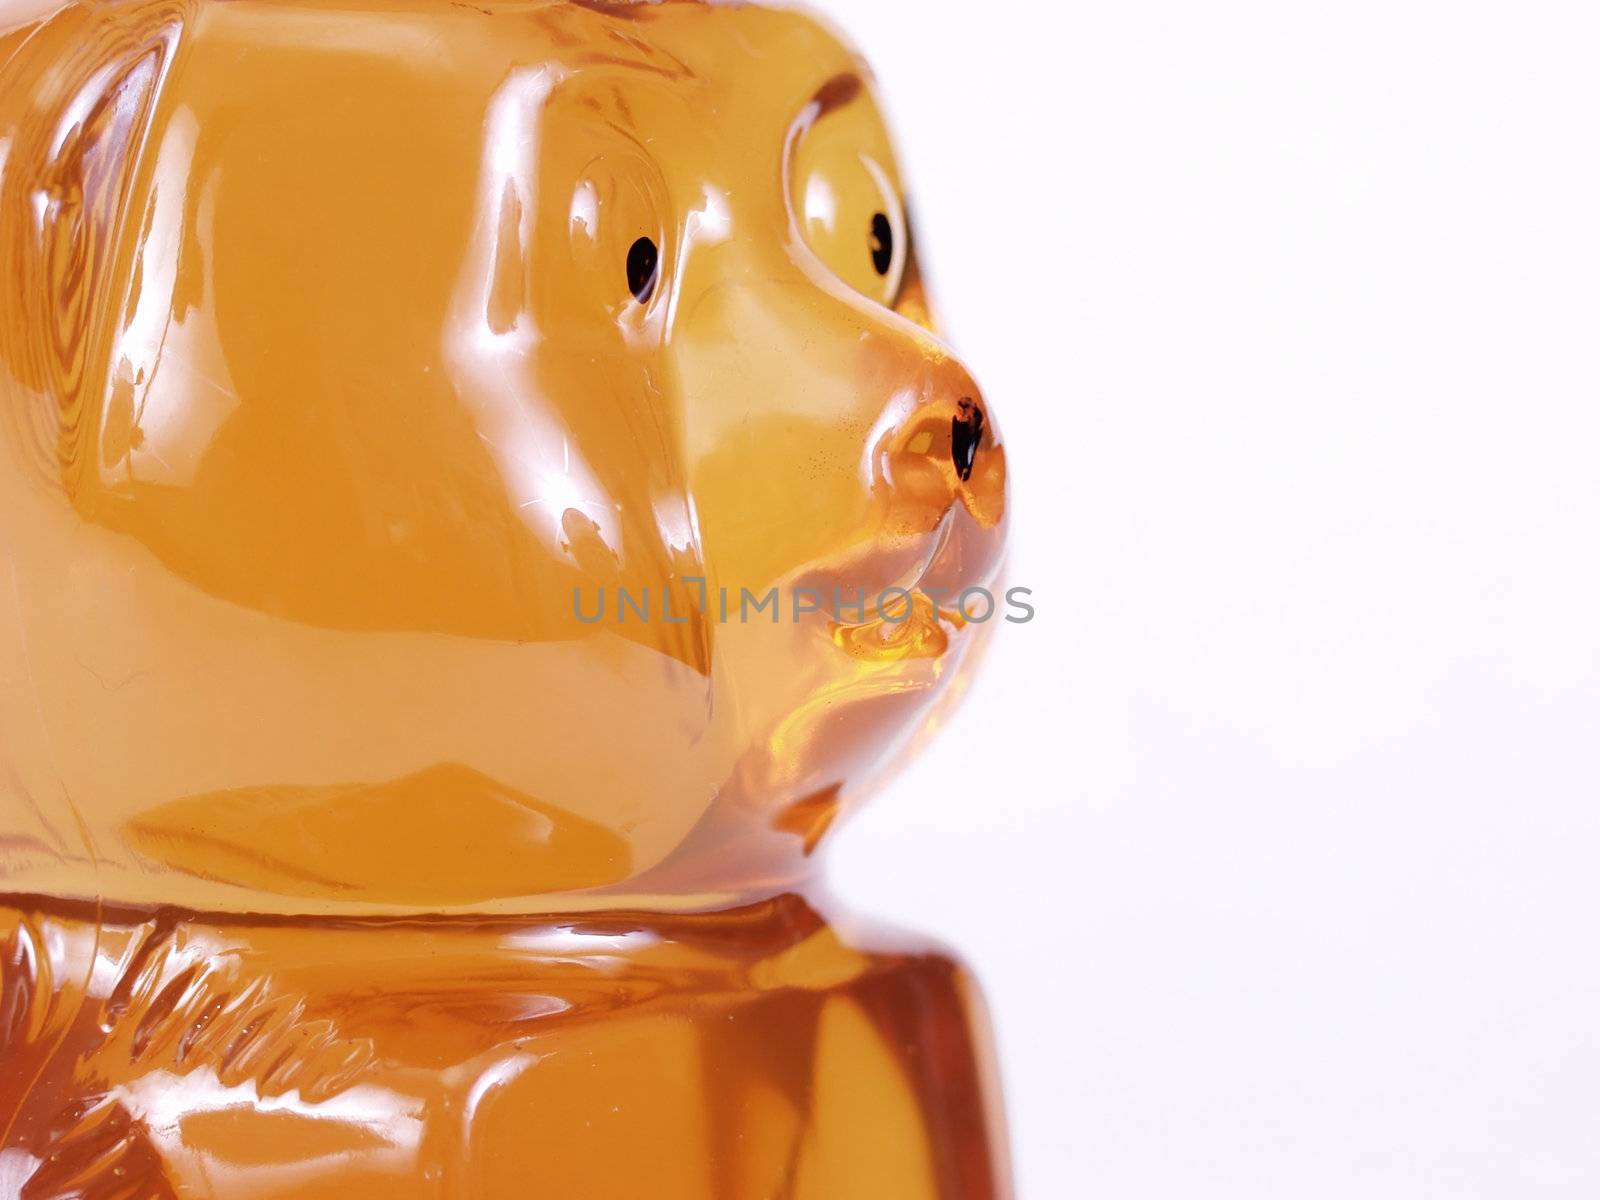 A close up of the face of a Honey bear jar isolated on a white background